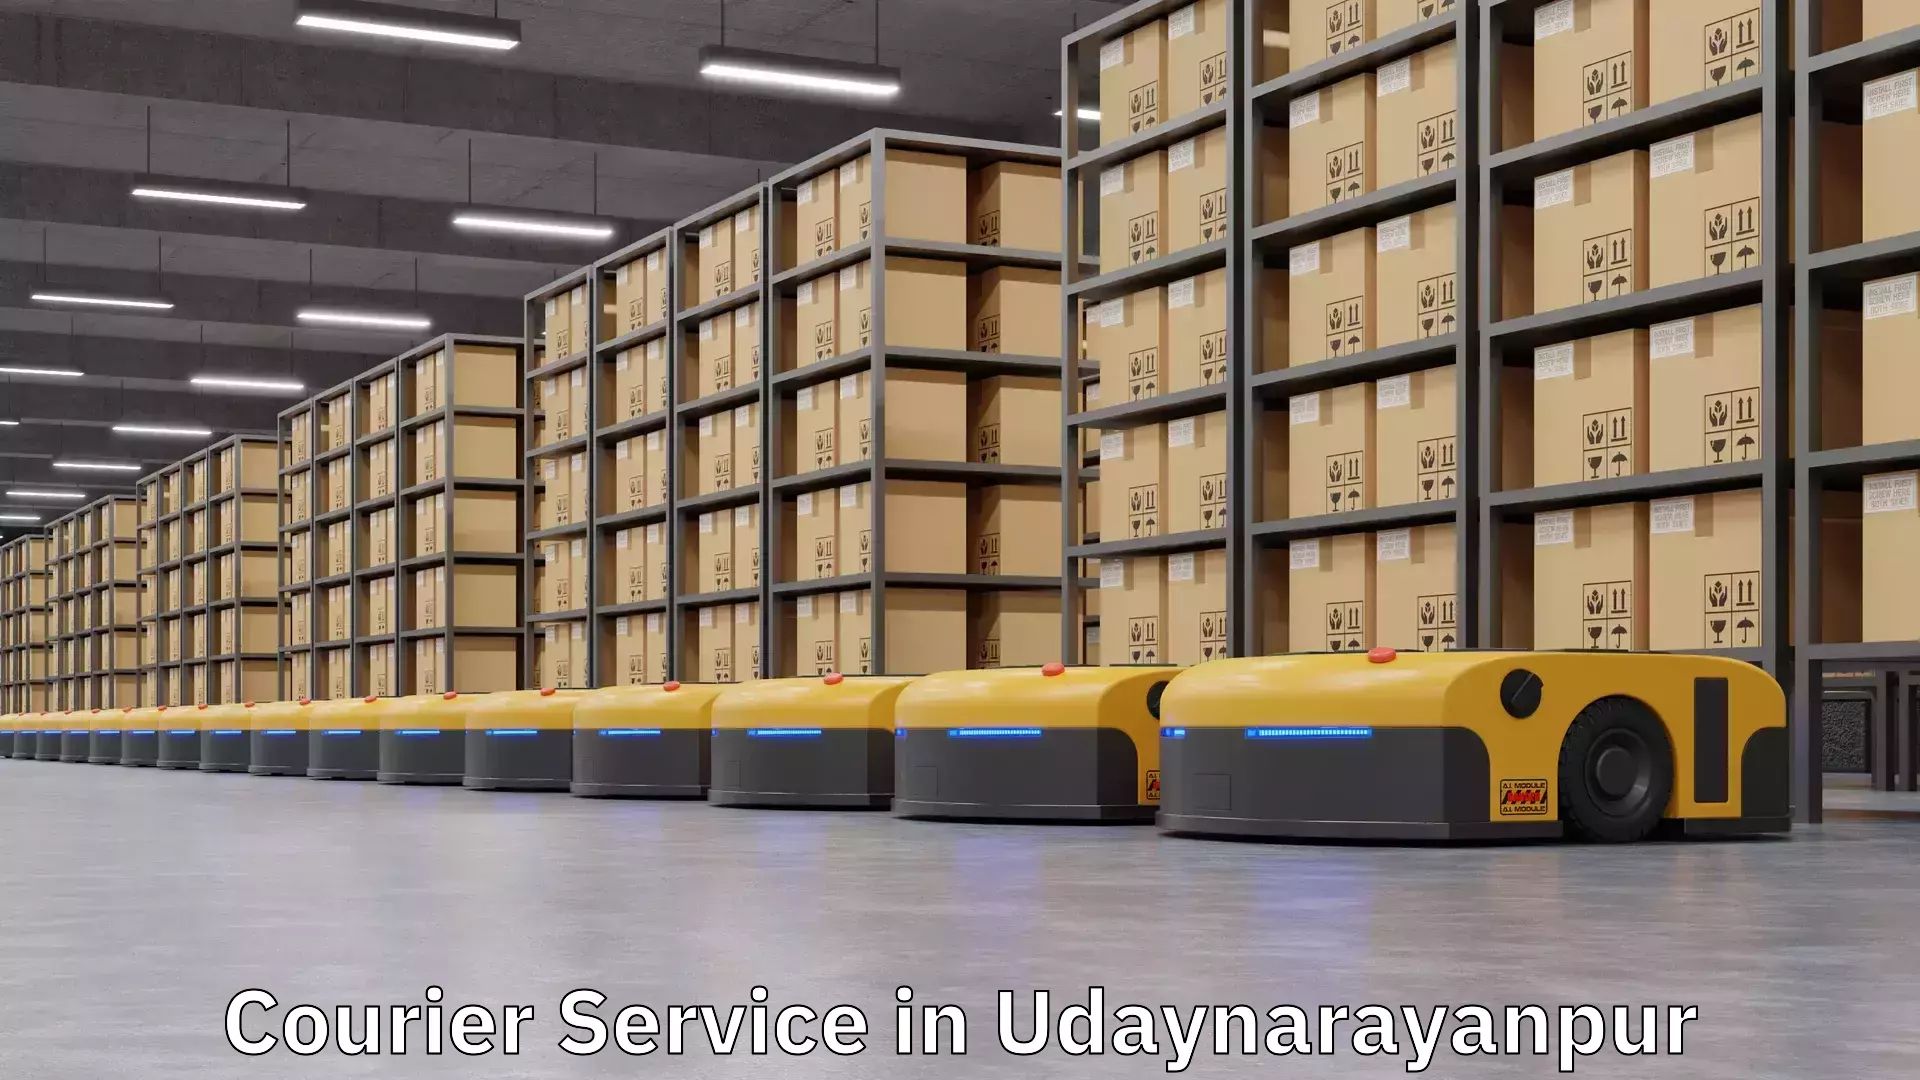 Next-day delivery options in Udaynarayanpur